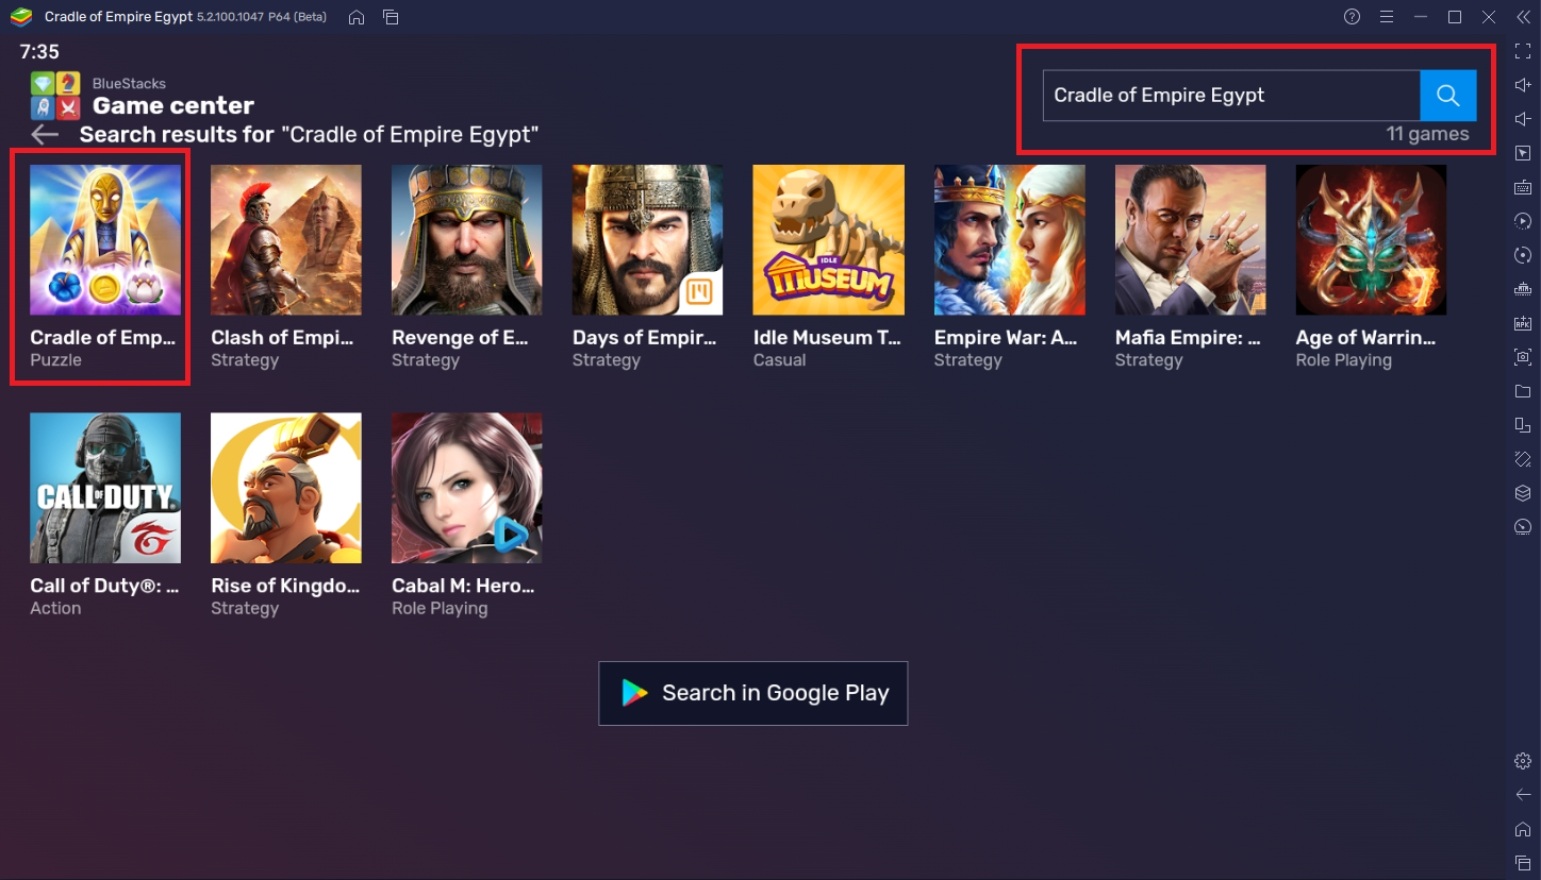 How to Play Cradle of Empire Egypt Match 3 on PC with BlueStacks